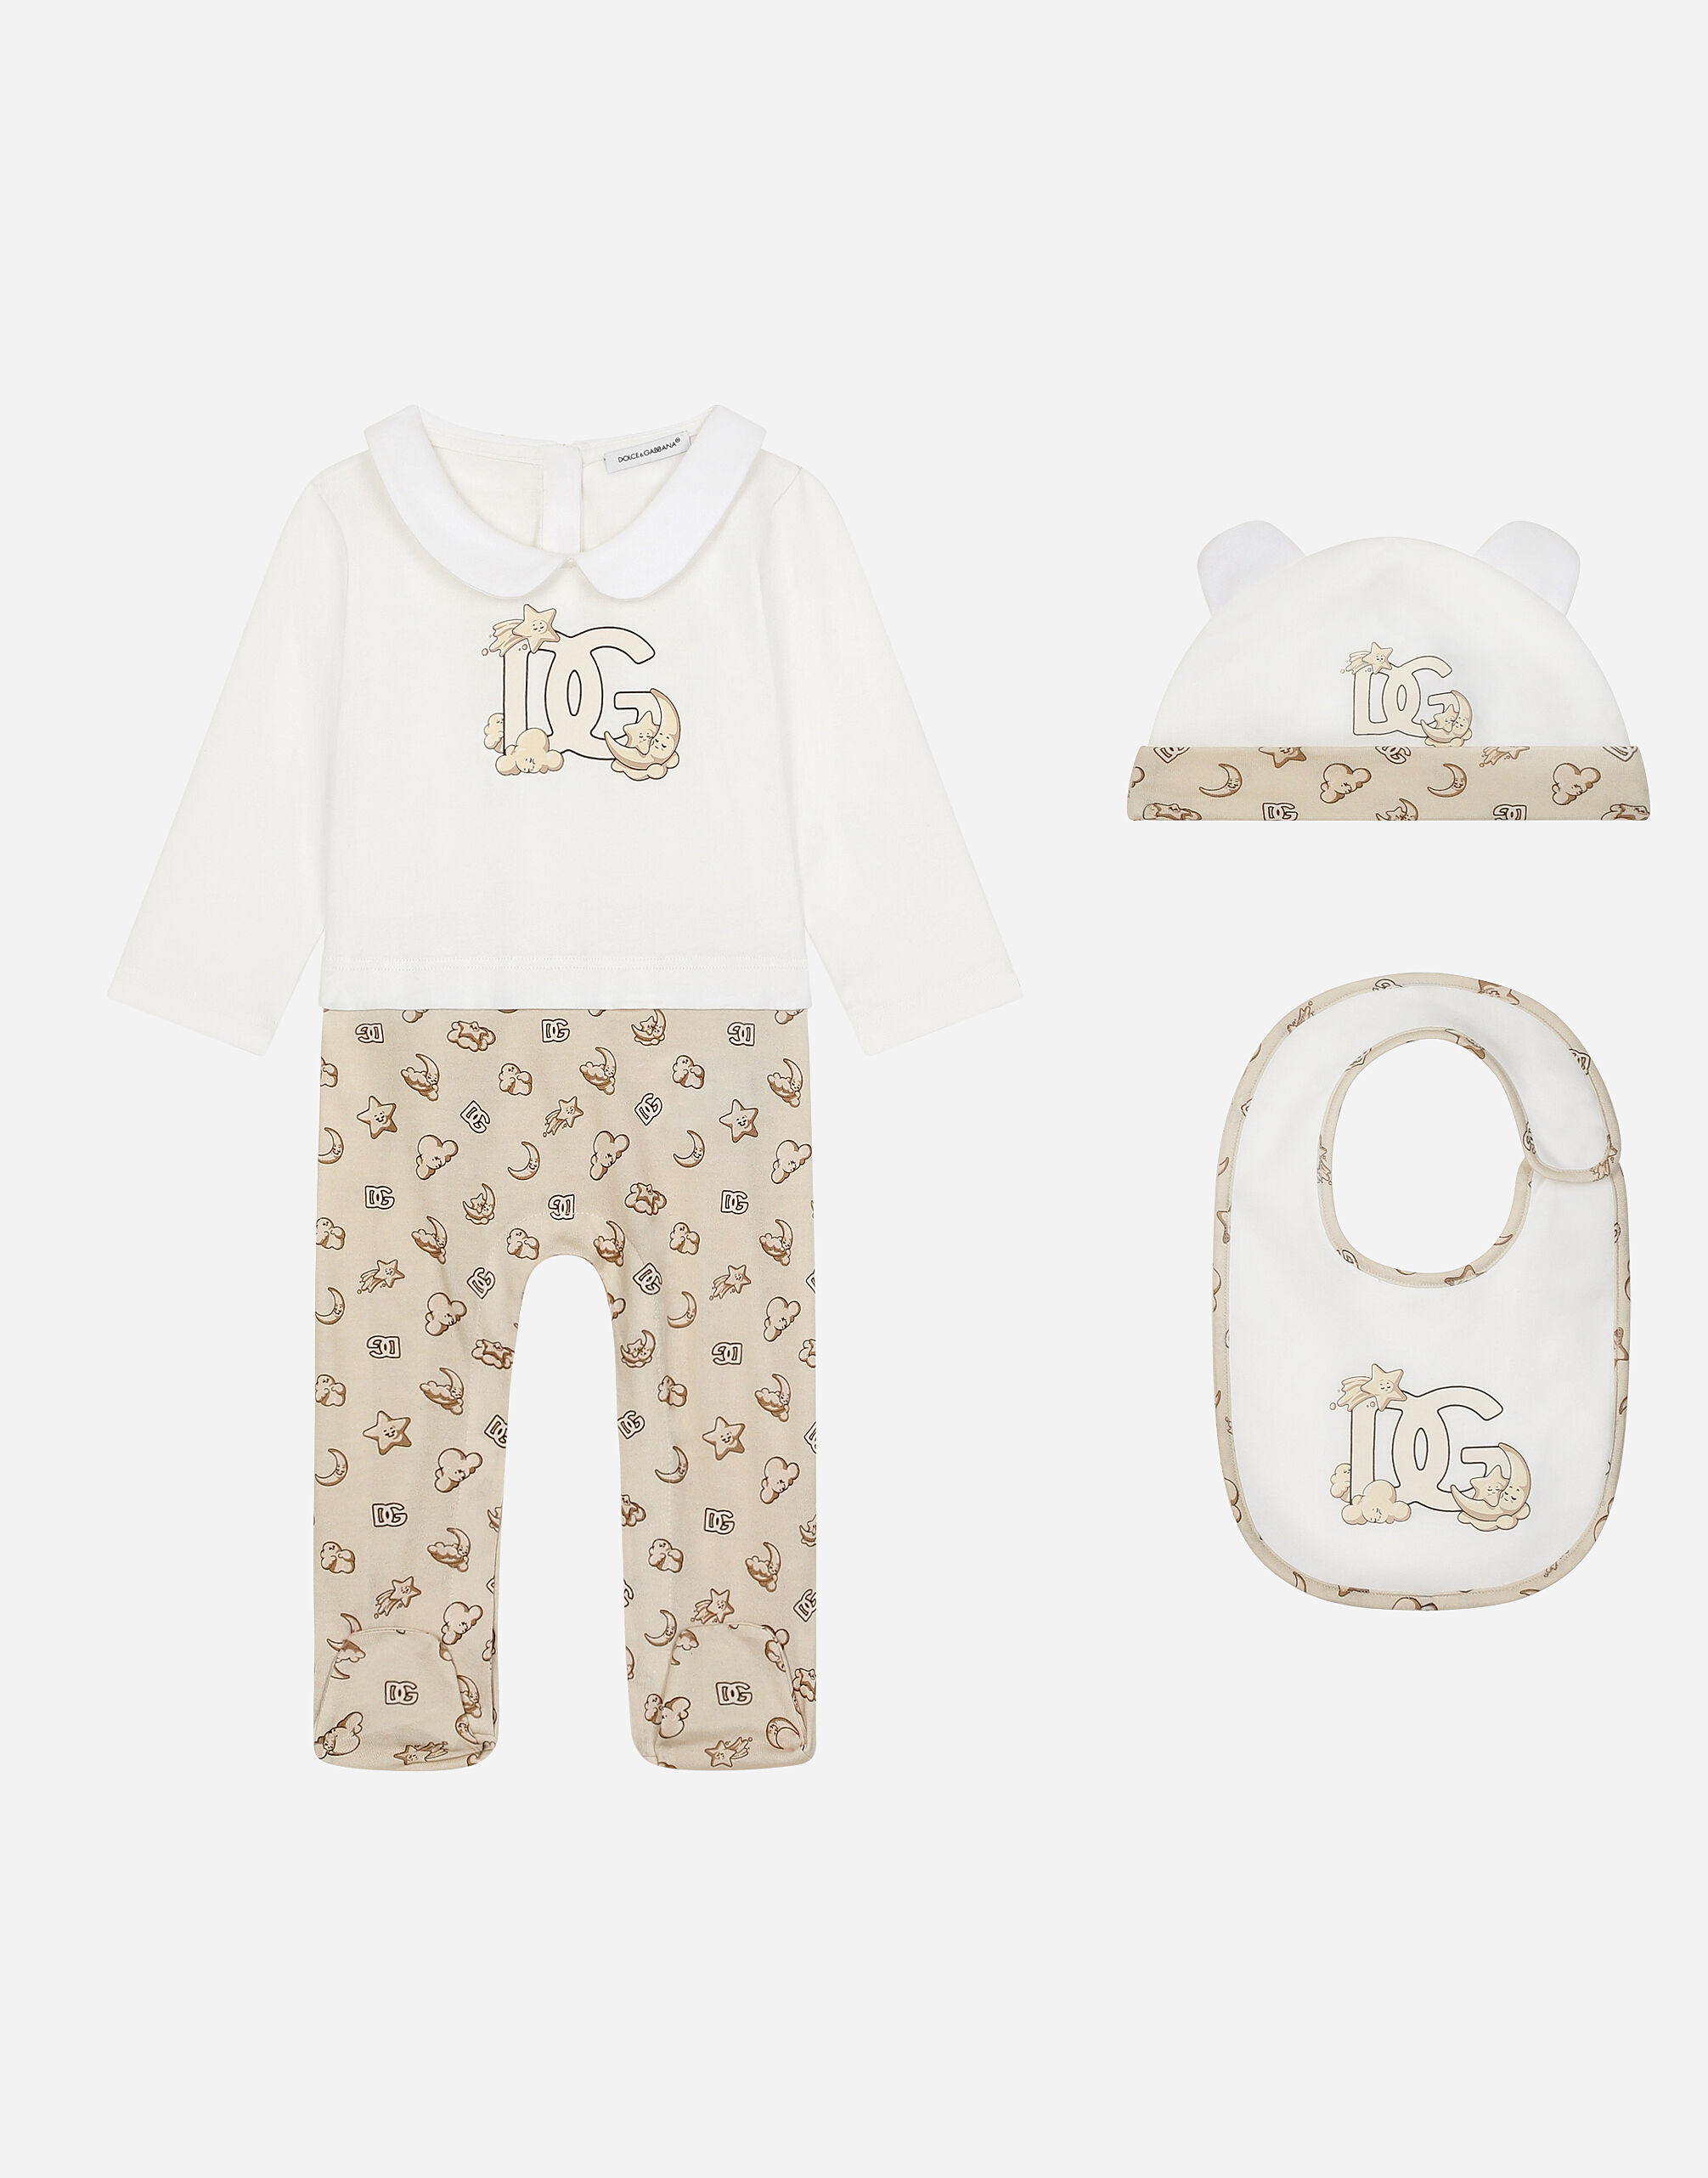 ${brand} 3-piece jersey gift set in moon and star print ${colorDescription} ${masterID}